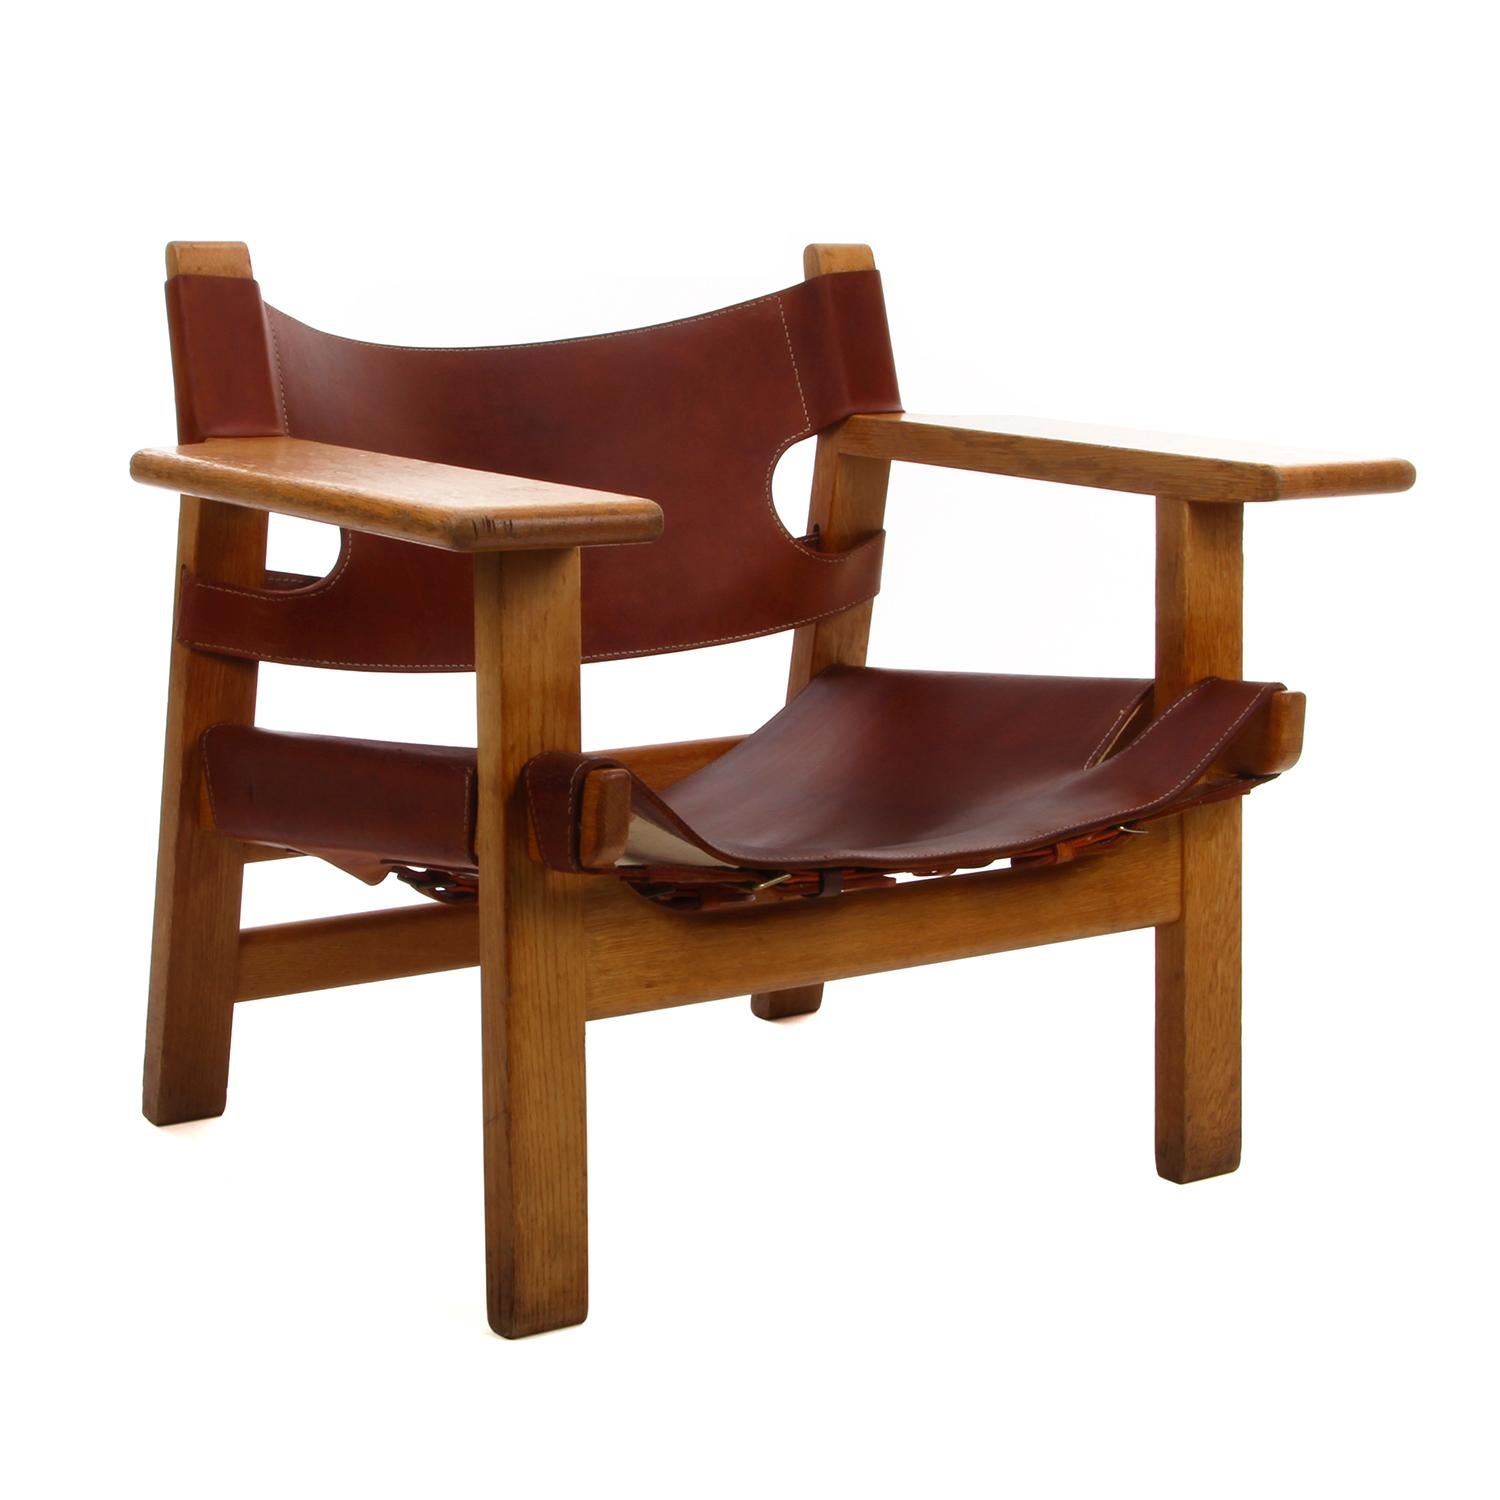 Spanish Chair by Børge Mogensen for Fredericia Furniture in 1958 - vintage edition with oak and original patinated cognac leather upholstery, in good vintage condition.

This is an iconic easy chair with its distinctive profile - solid oak frame